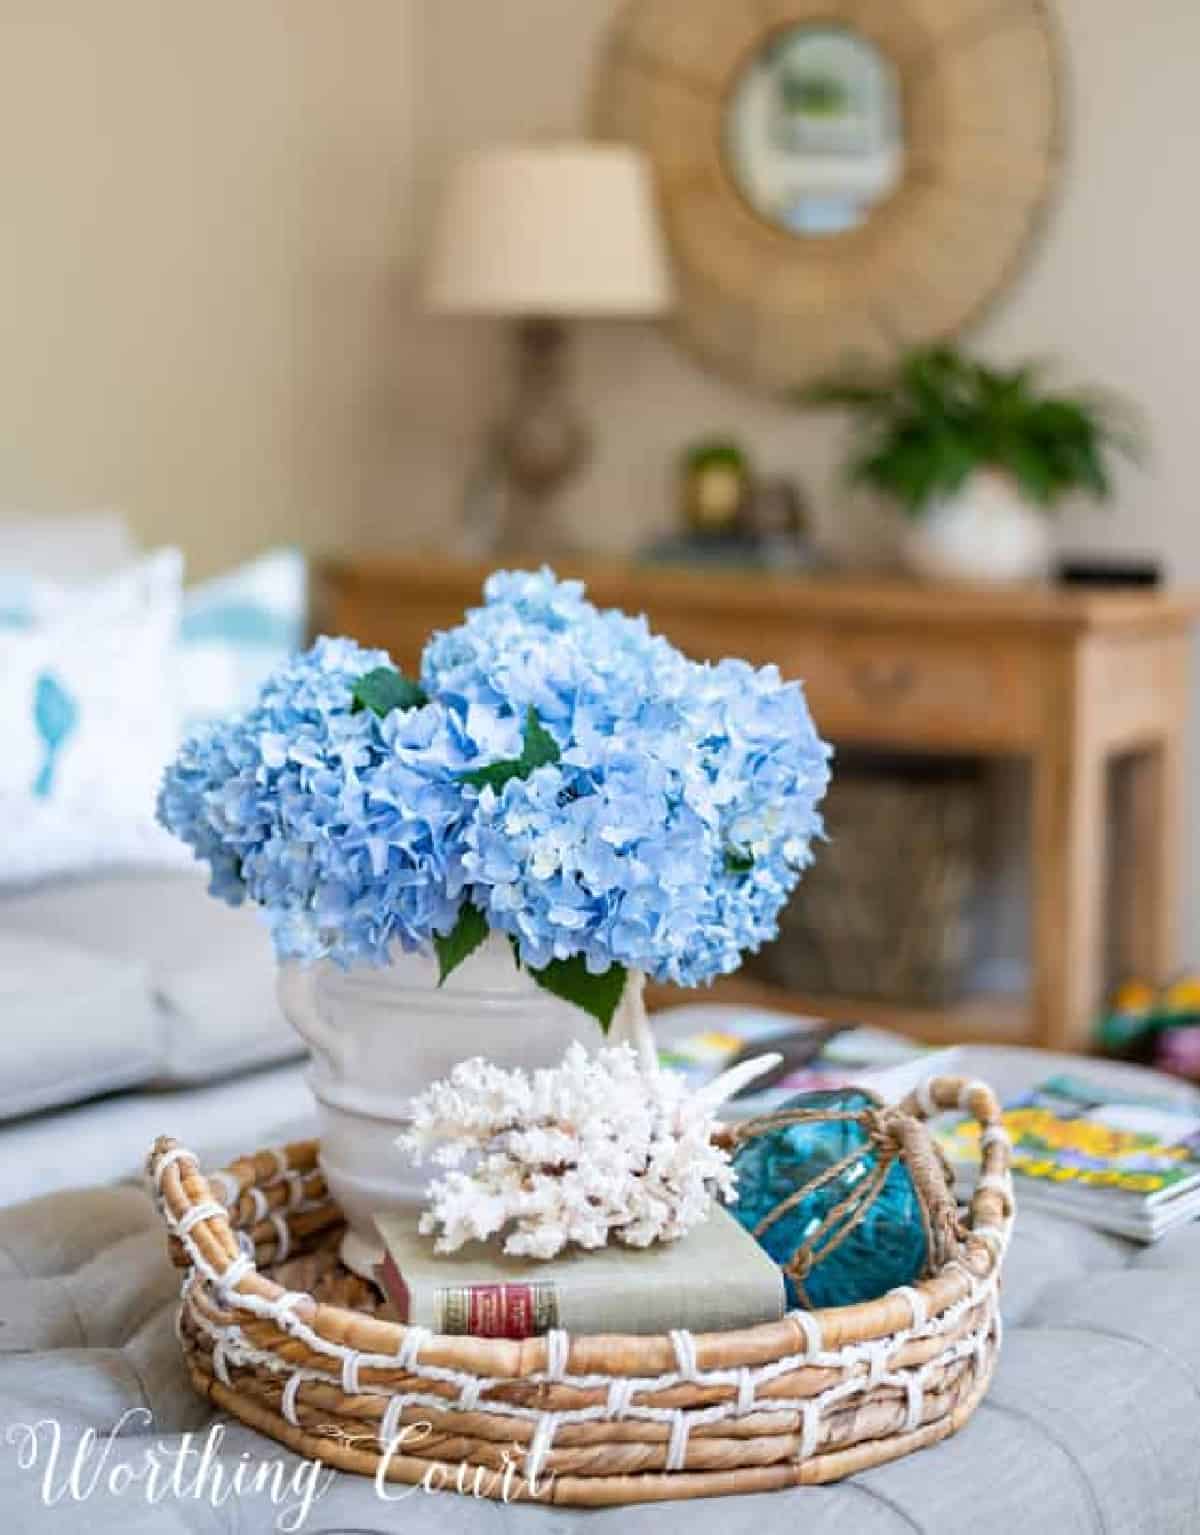 summer vignette with blue hydrangeas in a white vase with coral and a fishing float